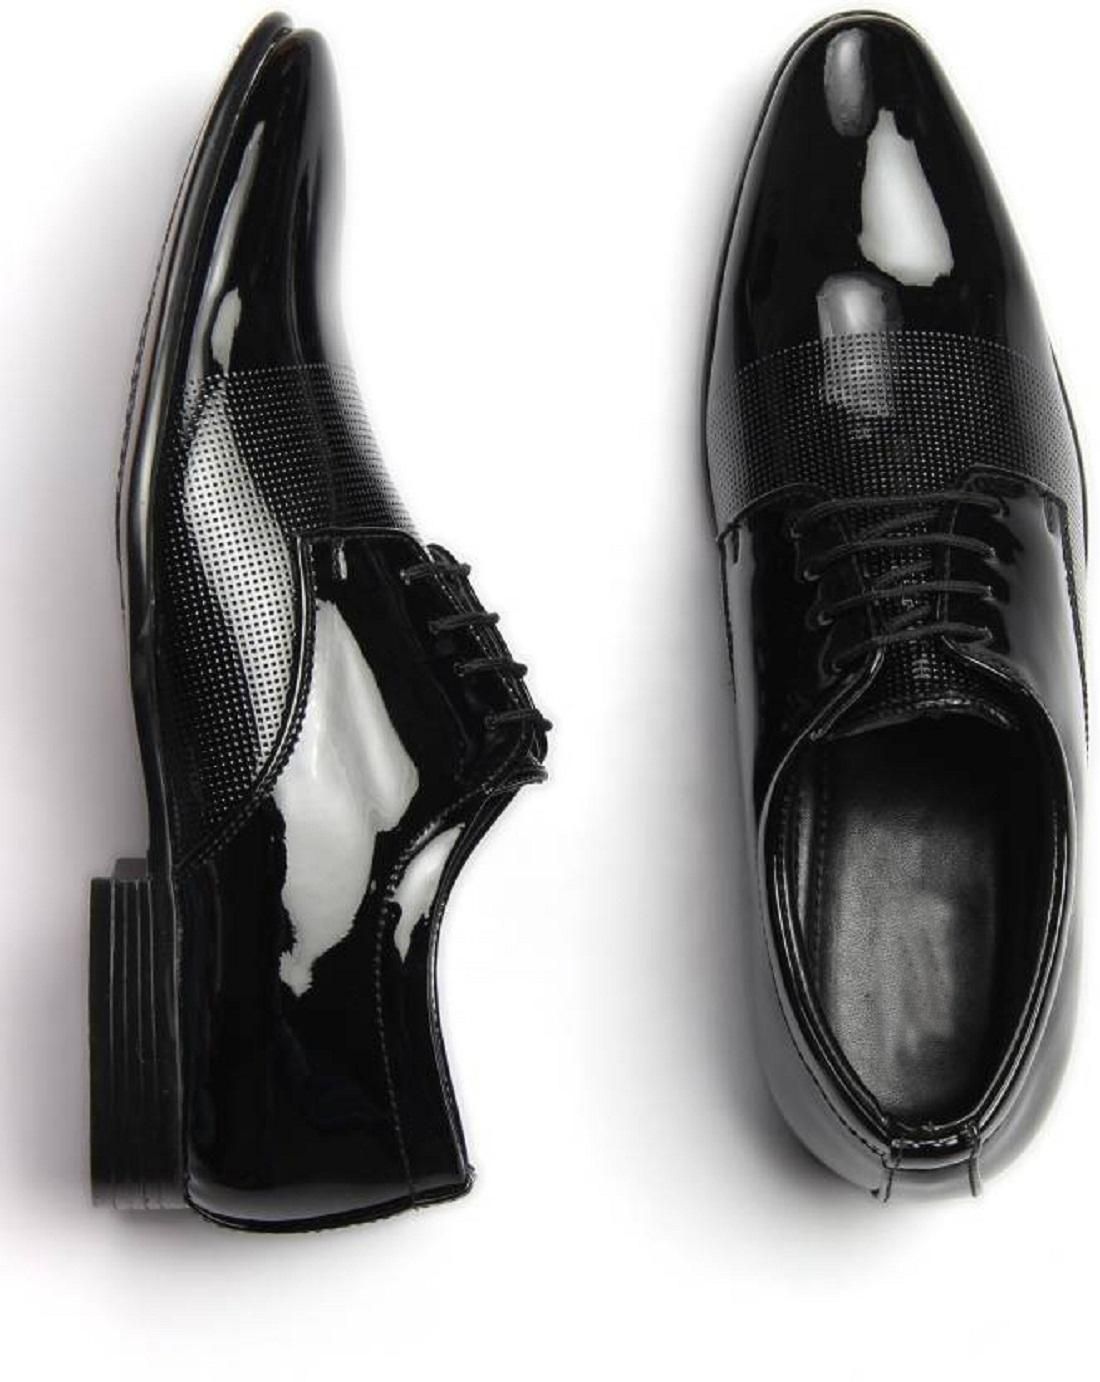 Men's Black Synthetic Leather Formal Shoes